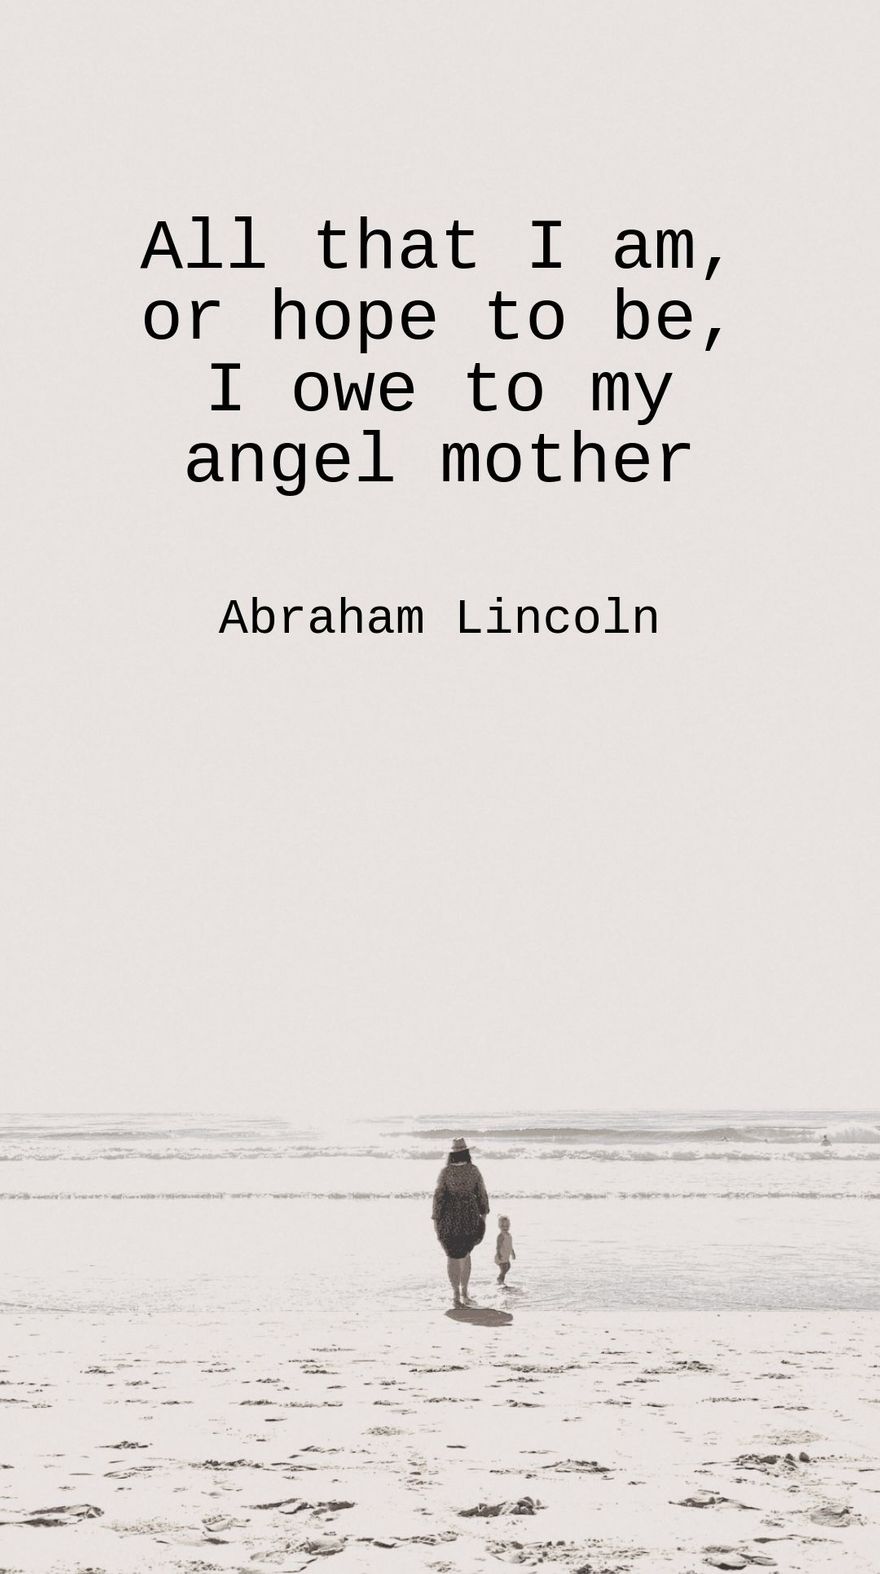 Free Abraham Lincoln - All that I am, or hope to be, I owe to my angel mother.  in JPG